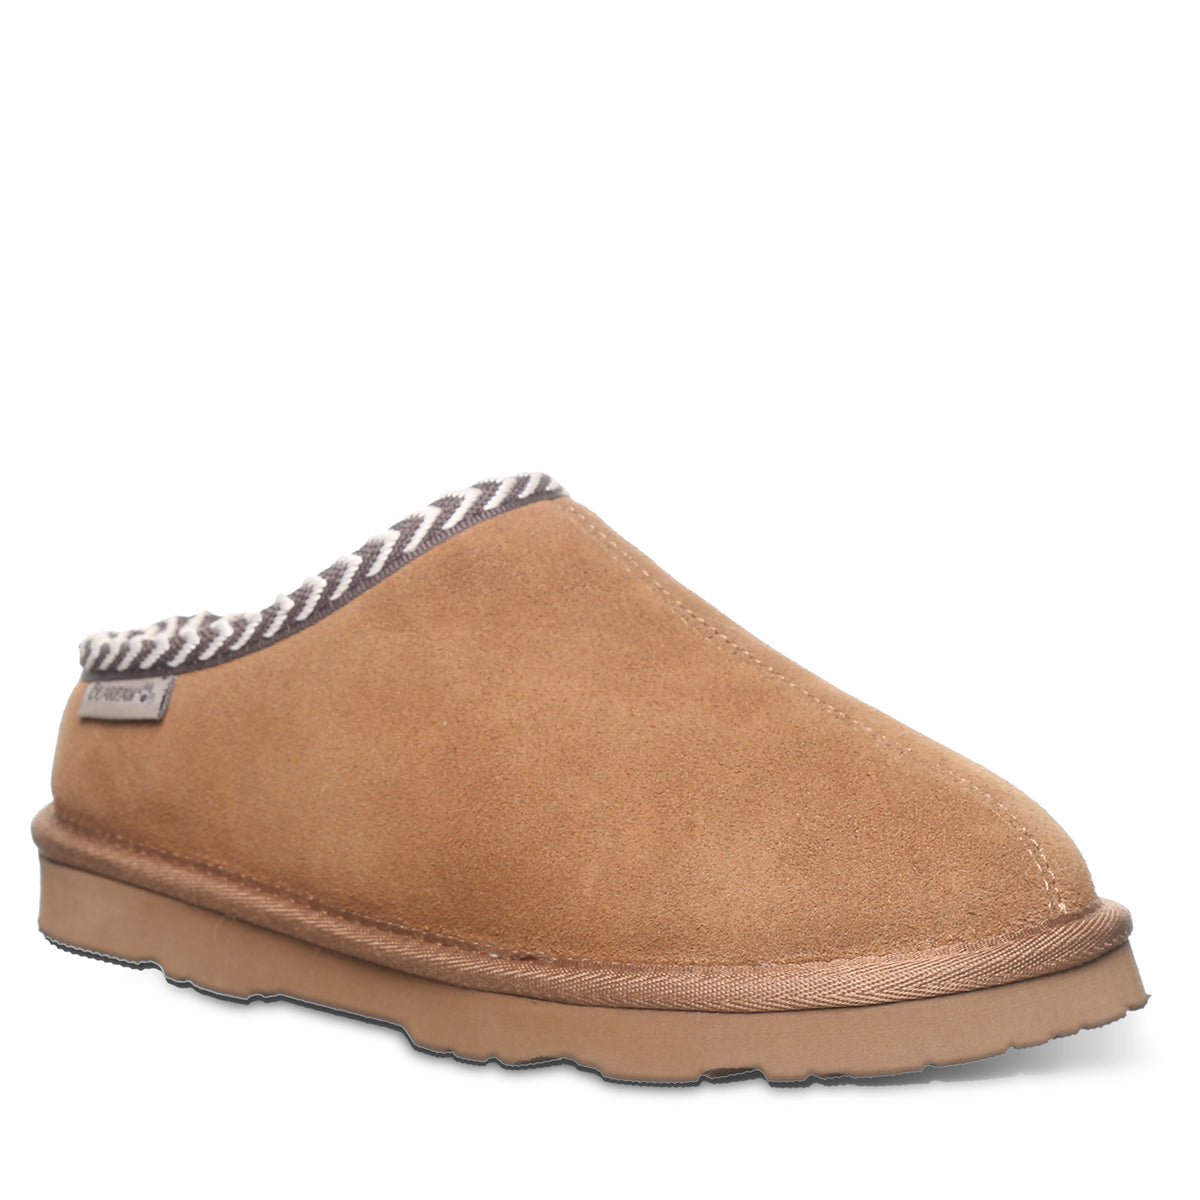 BEARPAW® Europe Official Site | Boots, Slippers, & Shoes – BearPaw Europe